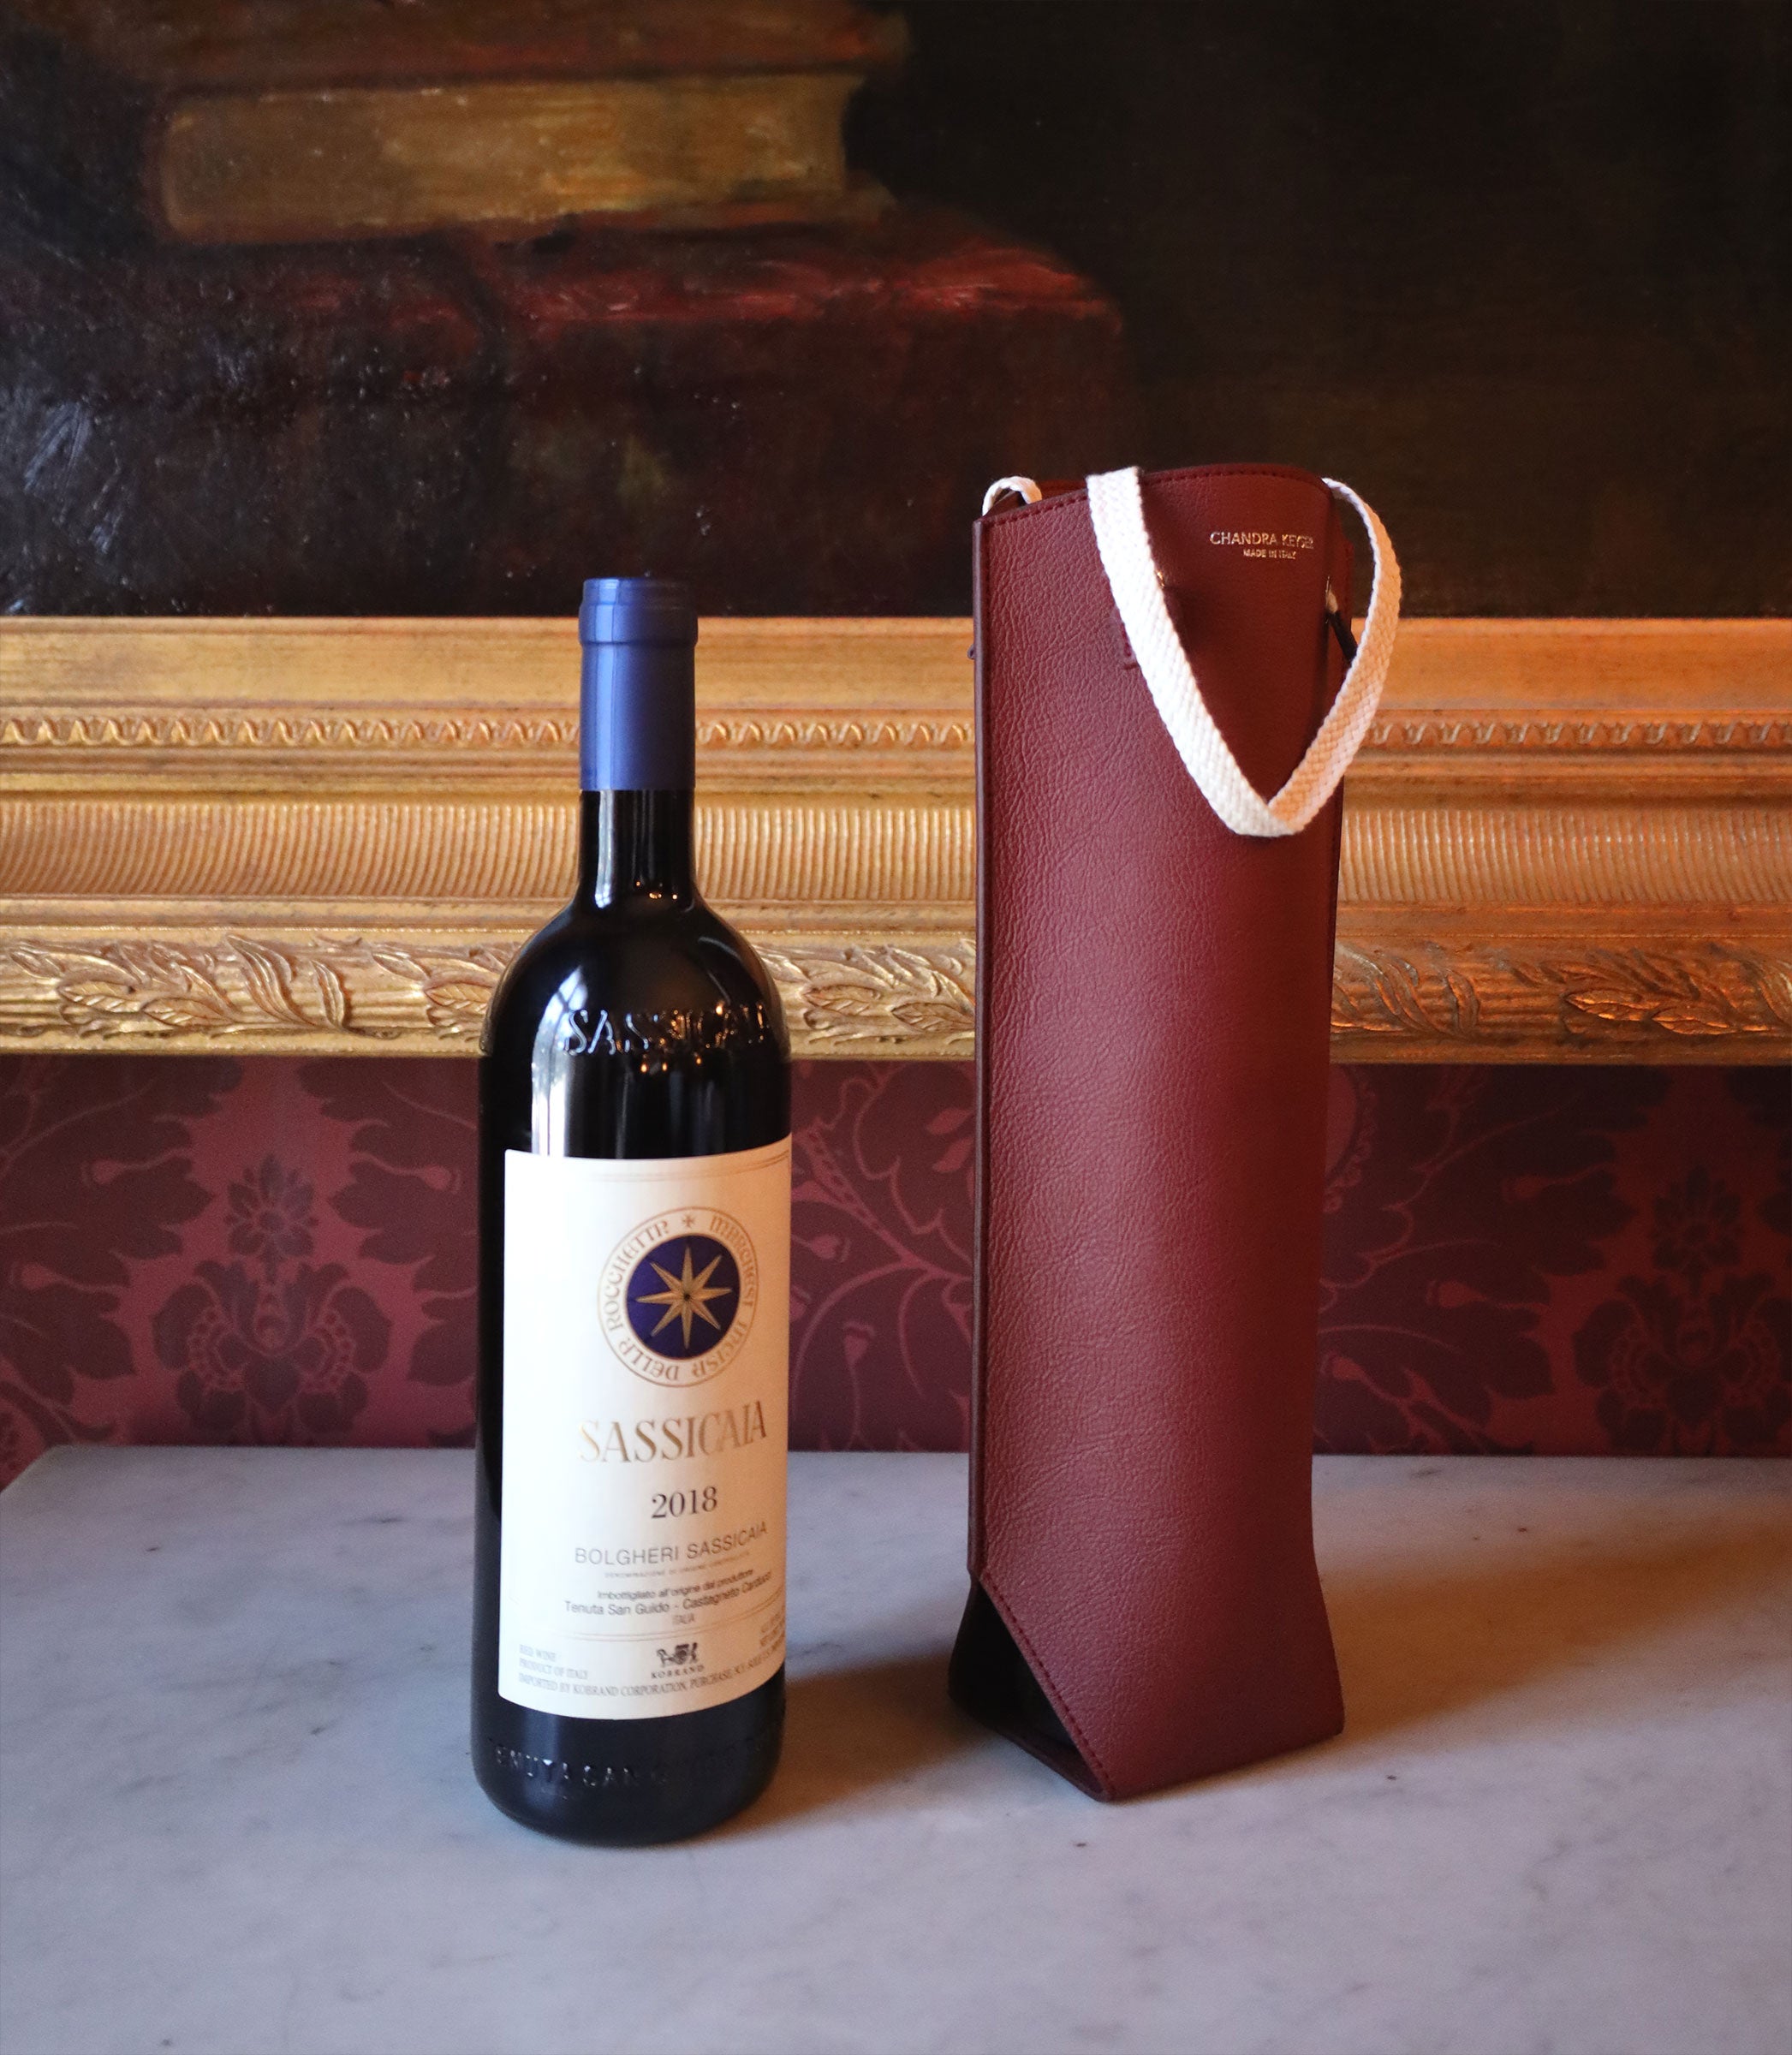 Chandra Keyser Sustainable Luxury Wine Carrier with Sassicaia wine. The wine tote is made from apple waste and meant to be gifted and regifted to support zero-waste fashion.